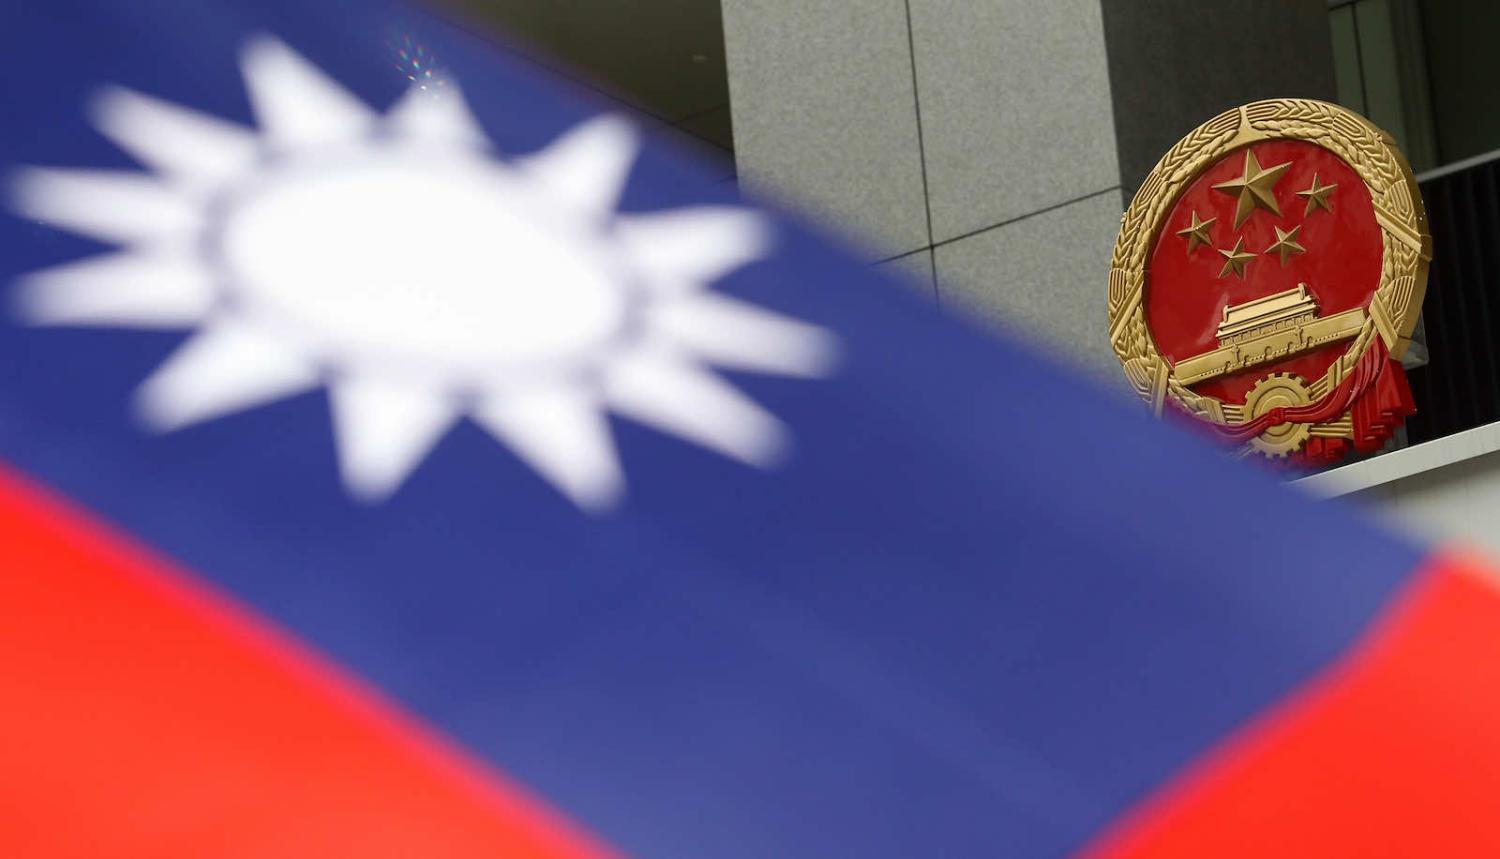 It would certainly be ridiculous to suppose that Taiwan would be to China as the Sudetenland was to Hitler (Edward Wong/South China Morning Post via Getty Images)